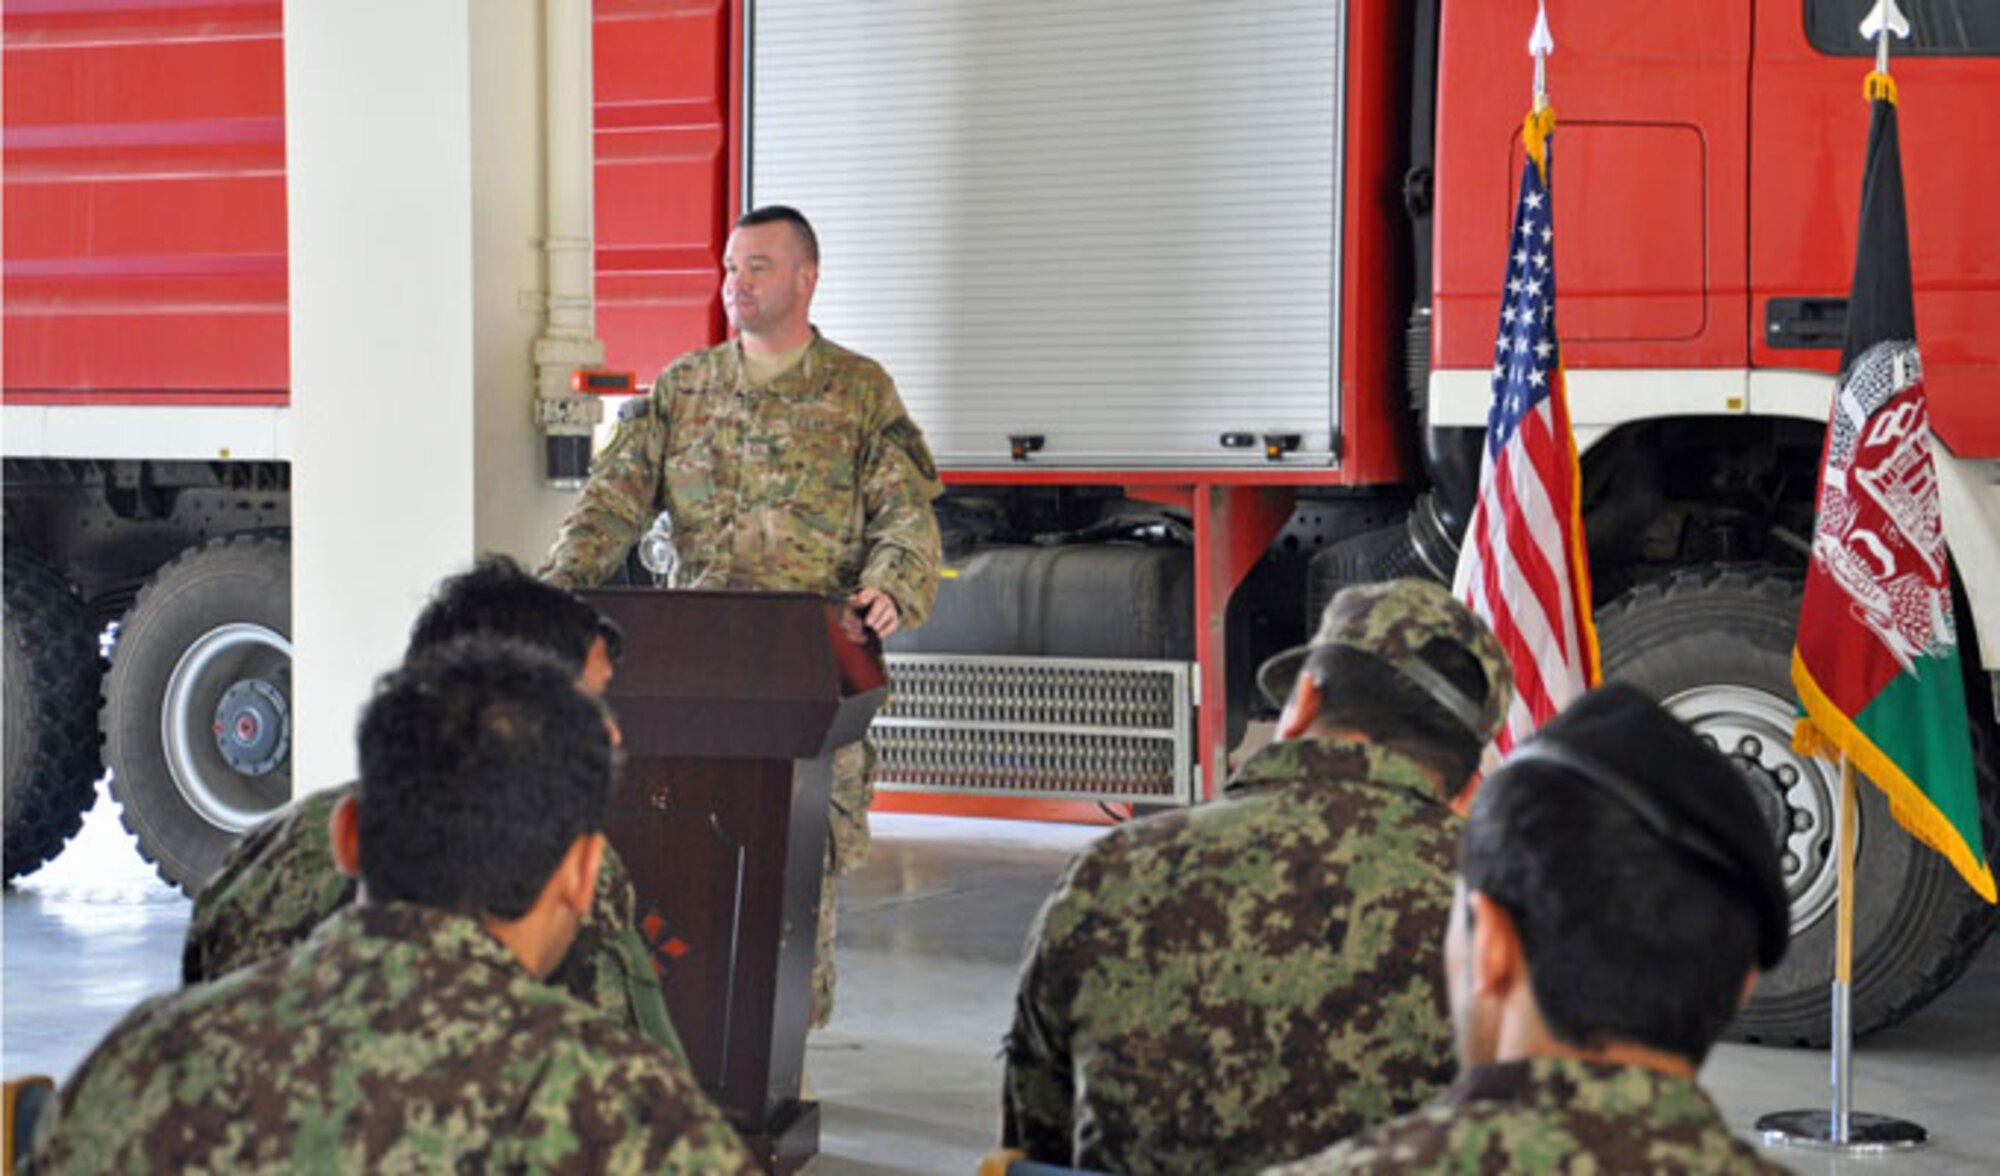 Master Sgt. Jeffery Hackworth addresses graduates of the first Afghan Fire Instructor Course during a ceremony Oct. 31, 2013 at Kabul International Airport, Afghanistan. The five-day class was developed by NATC-A advisors and graduated 13 Afghan Air Force and Afghan National Army firefighters as certified instructors. The graduates can now certify additional firefighters at their home fire stations. Hackworth is the NATO Air Training Command-Afghanistan fire adviser.
